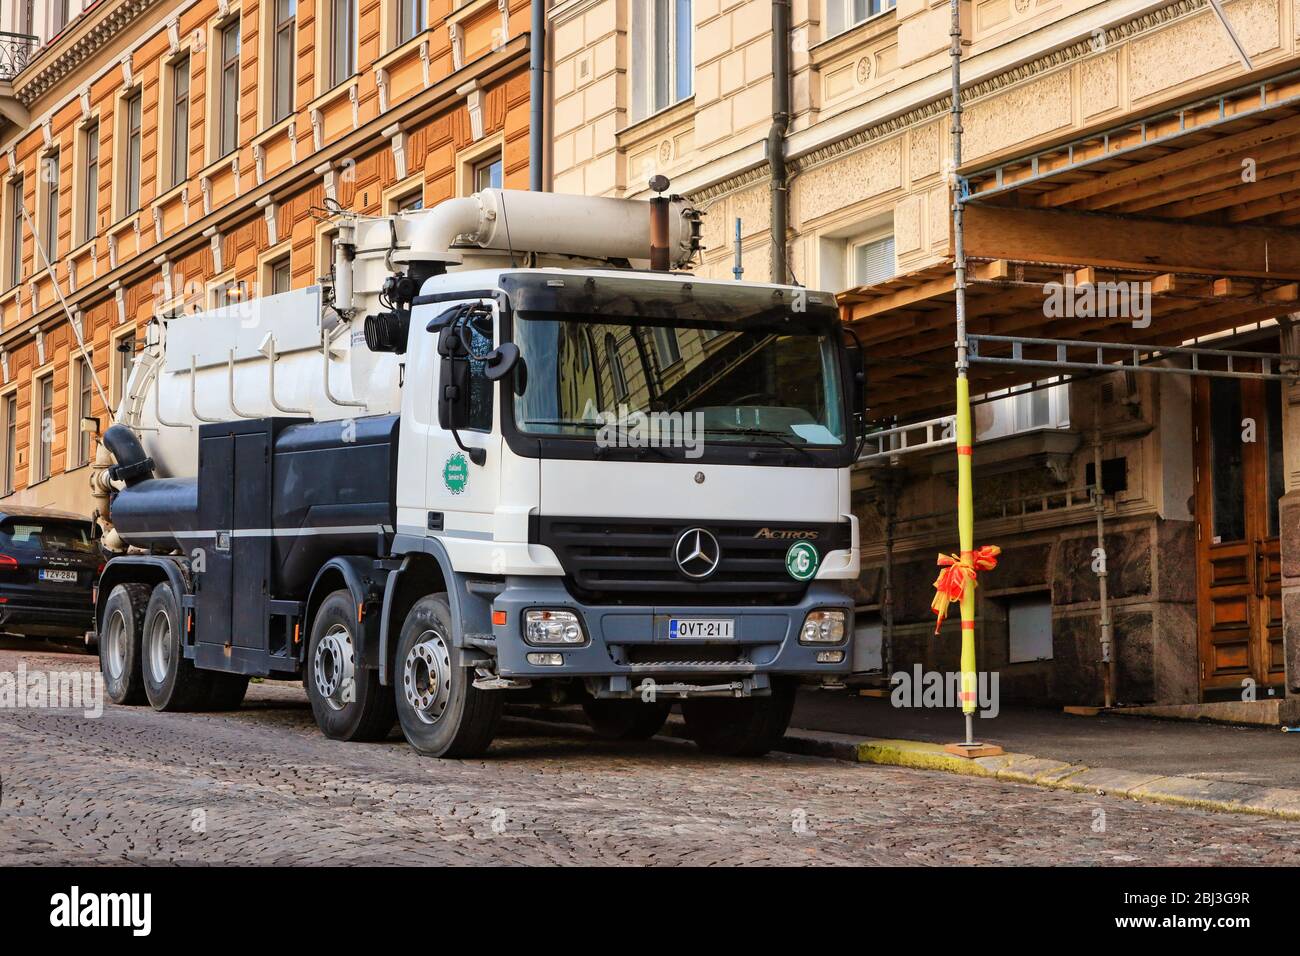 White Vacu-Press 8000 truck by city work site. Vacu-press is suitable for suction and blowing of dry and wet material. Helsinki, Finland. Apr 28, 20. Stock Photo